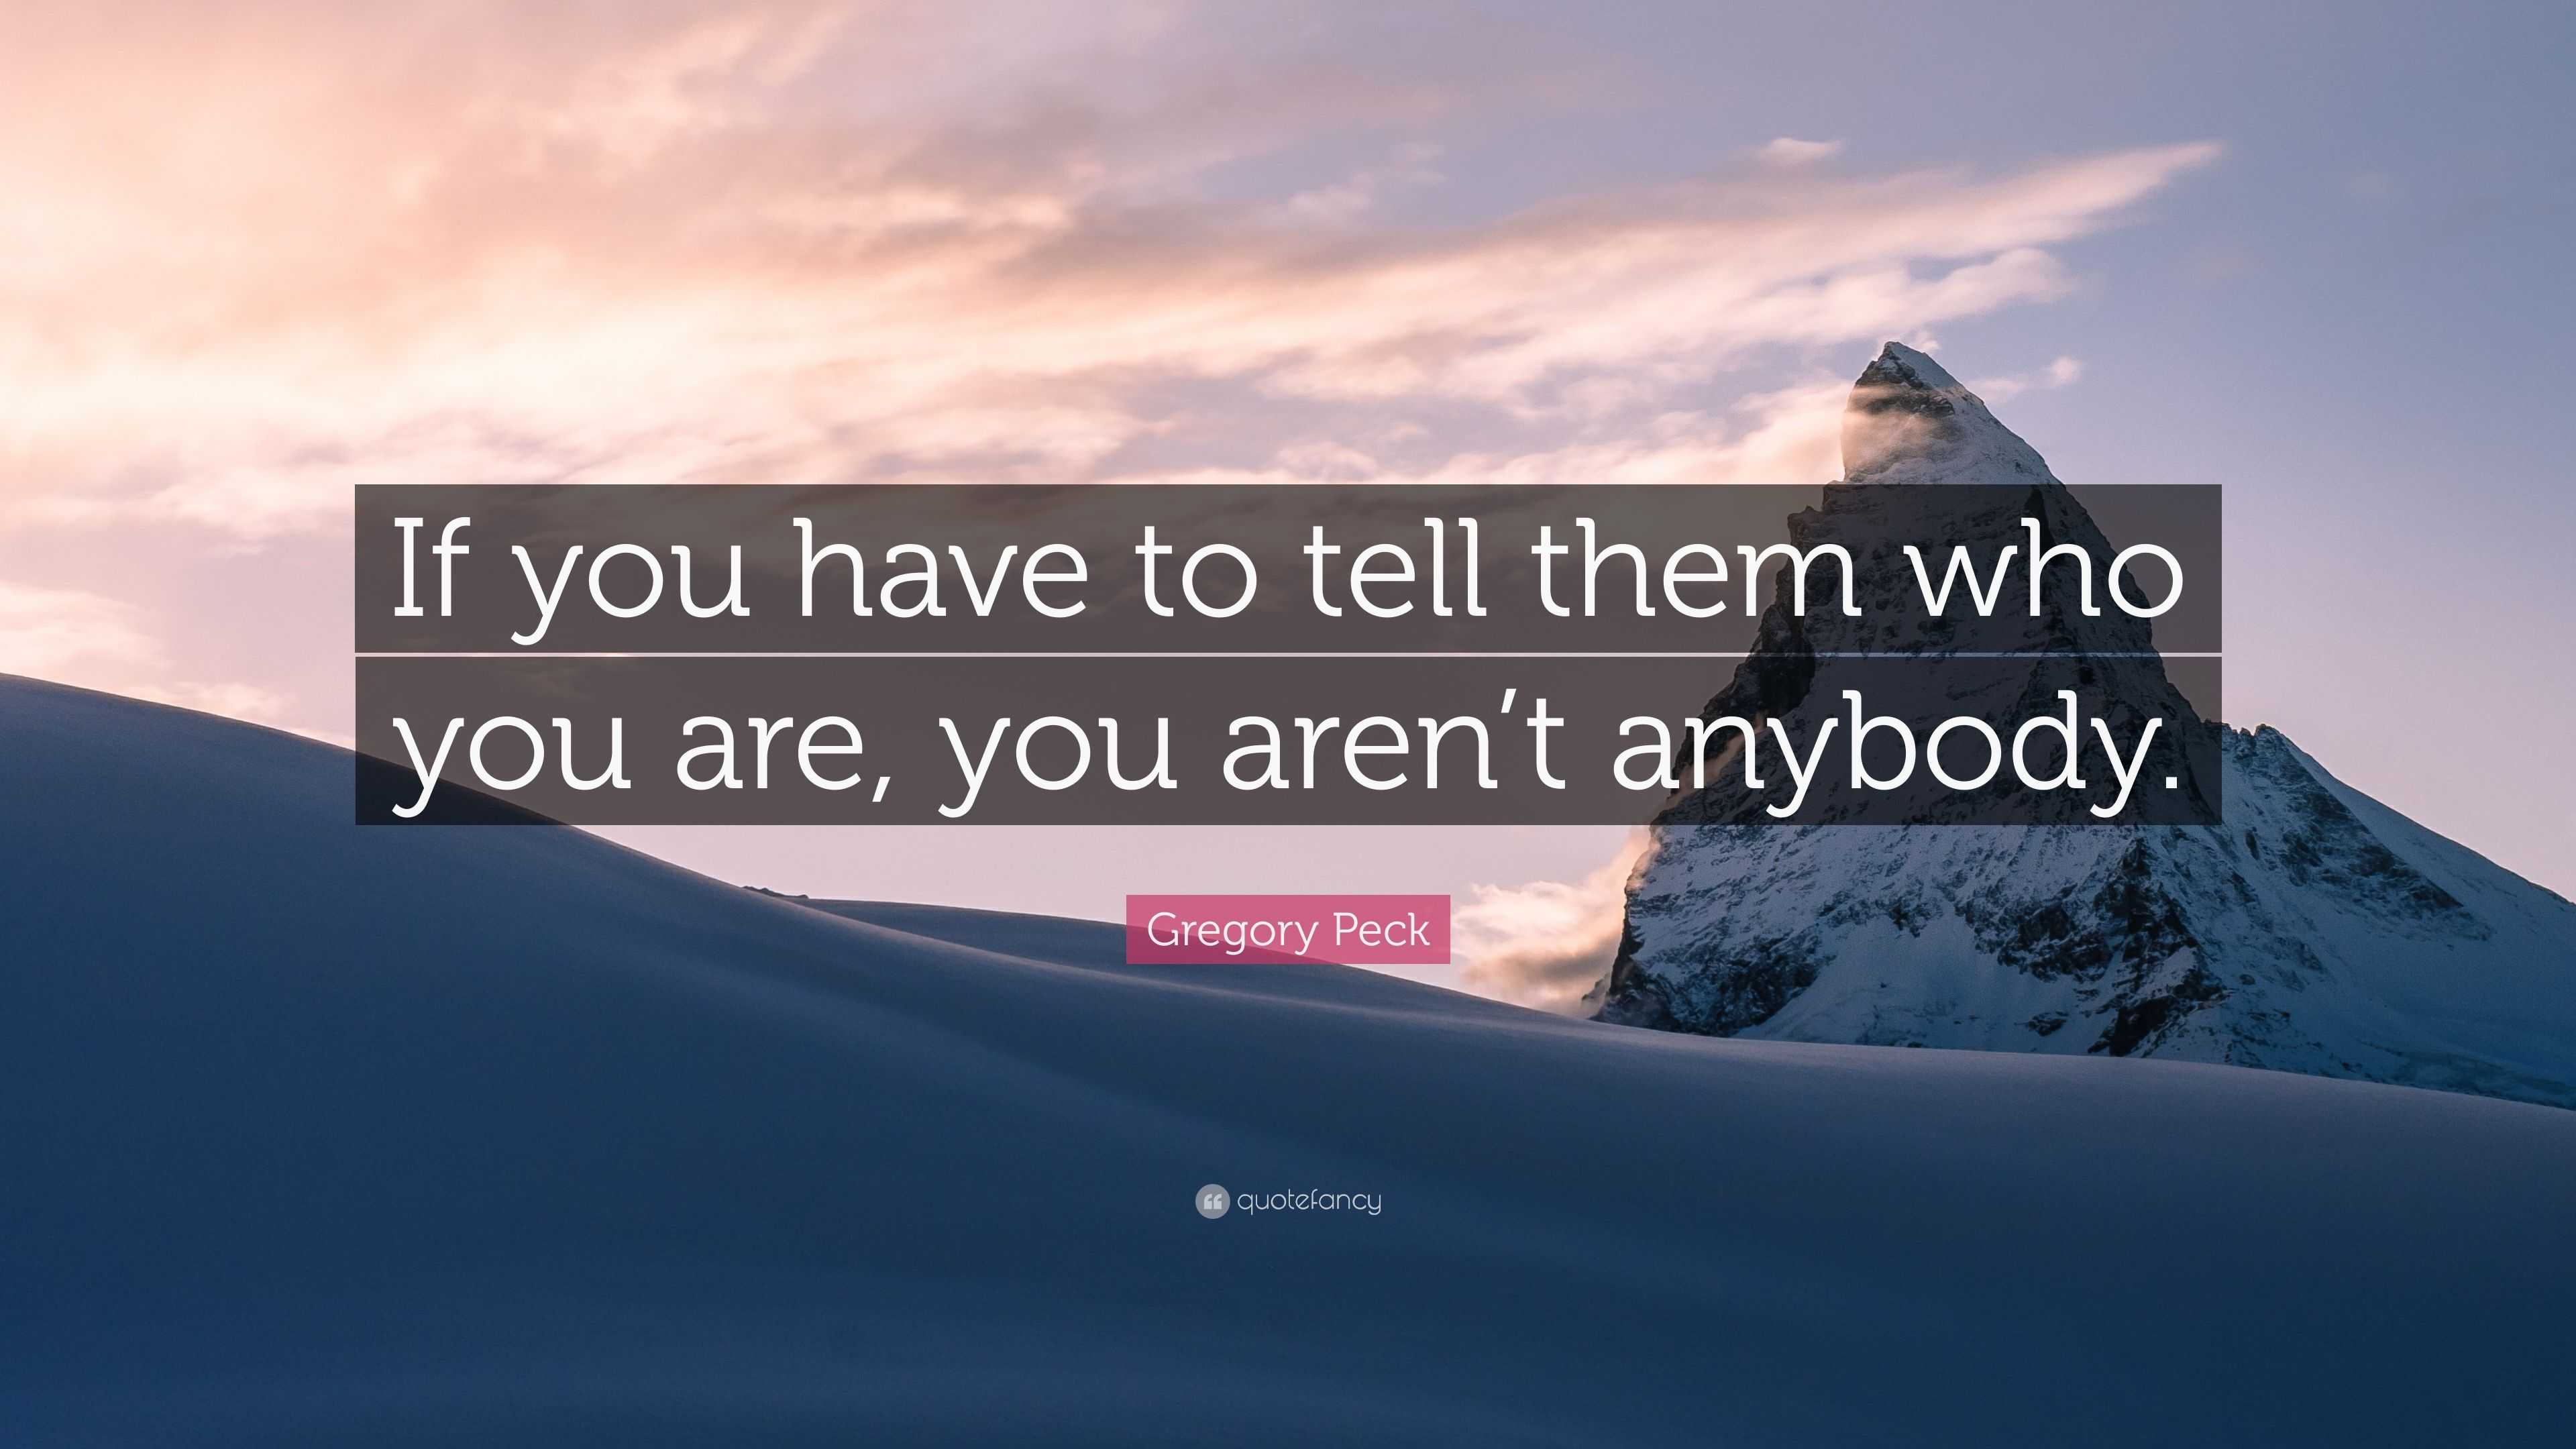 Gregory Peck Quote: “If you have to tell them who you are